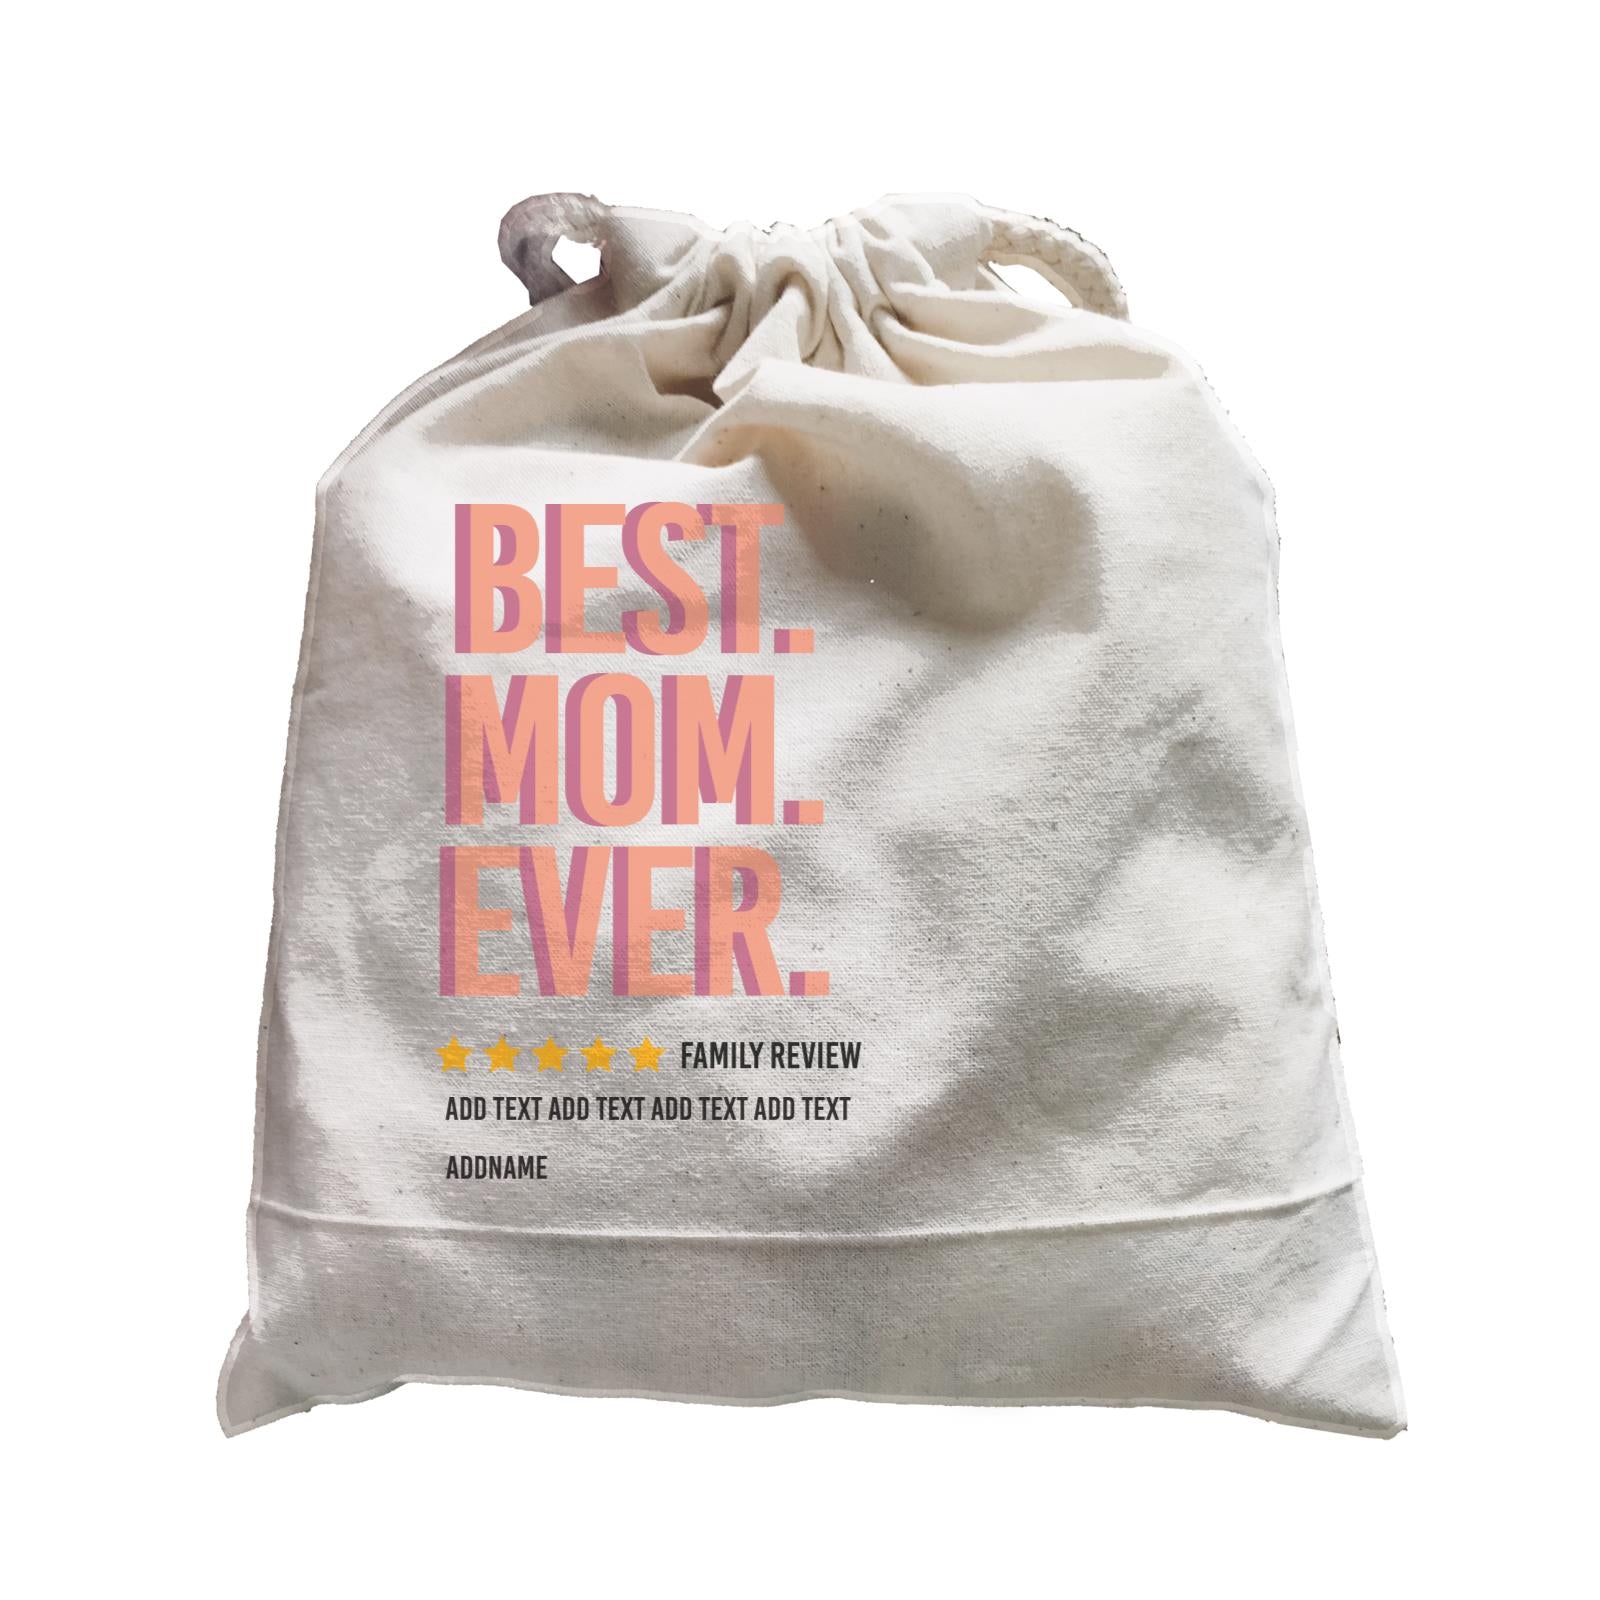 Awesome Mom 1 Best Mom Ever Family Review Add Text And Addname Satchel